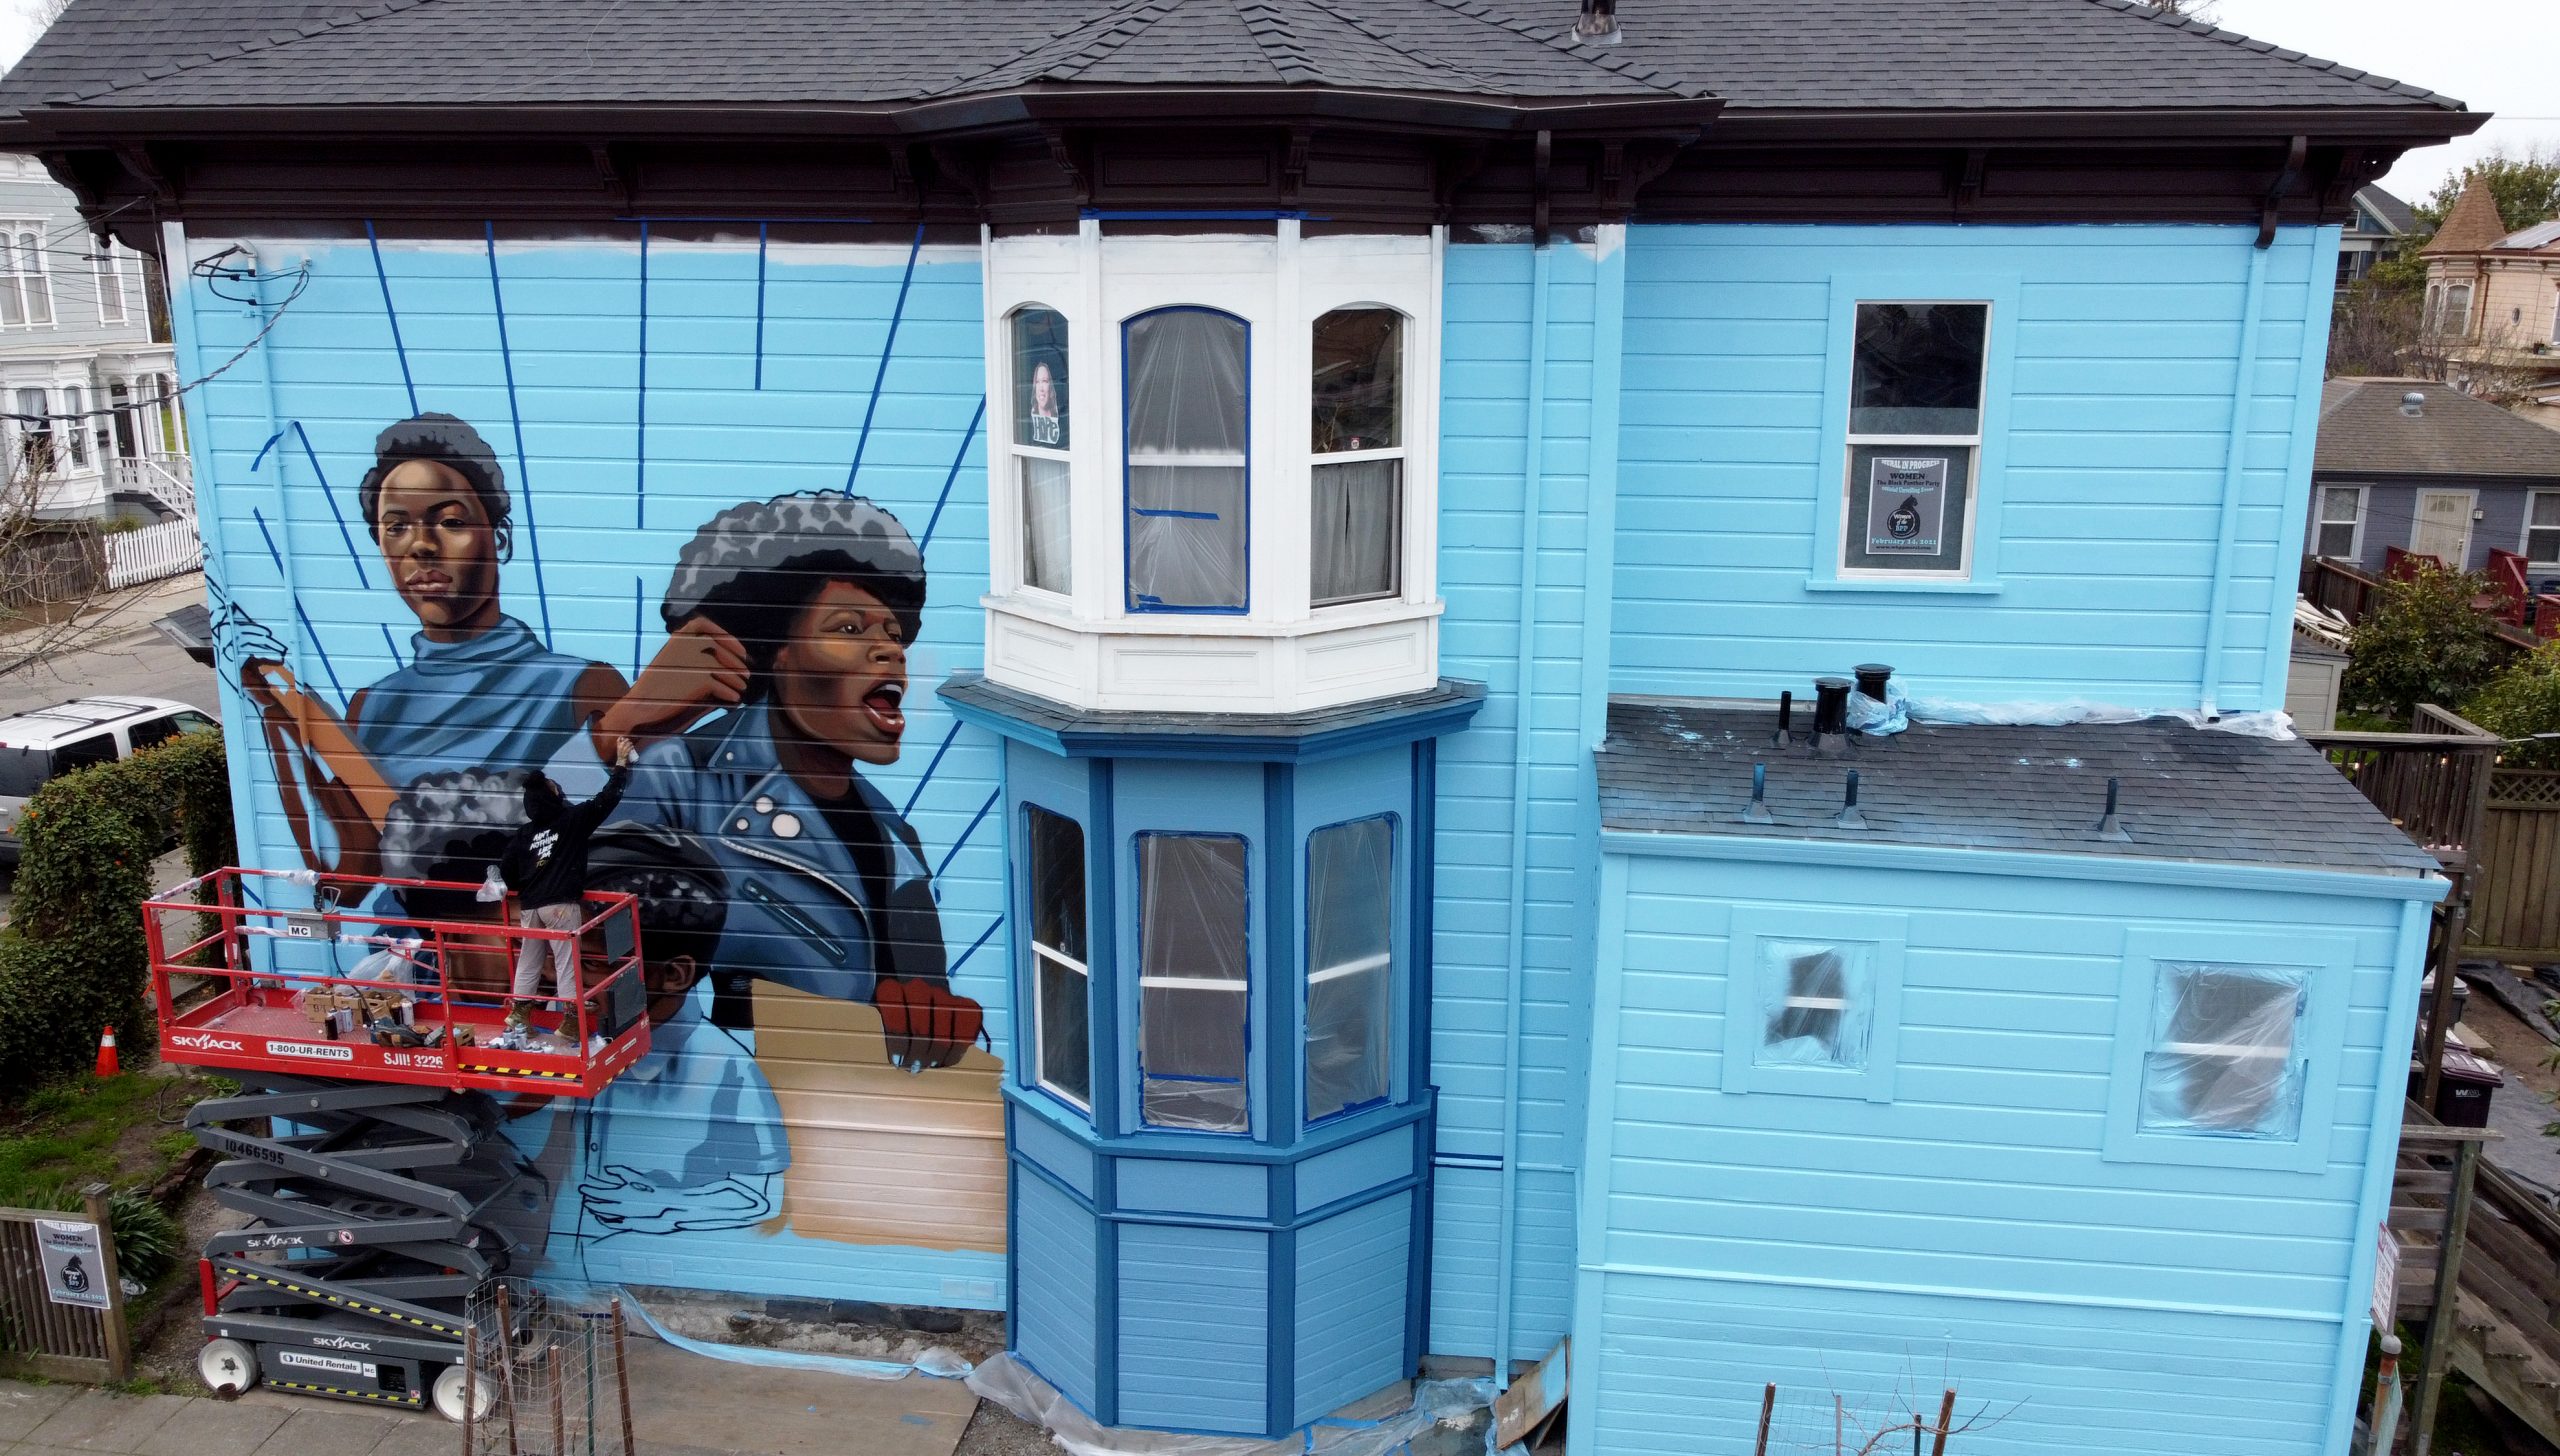 An image of a Victorian home painted with baby blue and images of powerful Black women from the Black Panther Party painted on the outside of the house in West Oakland.